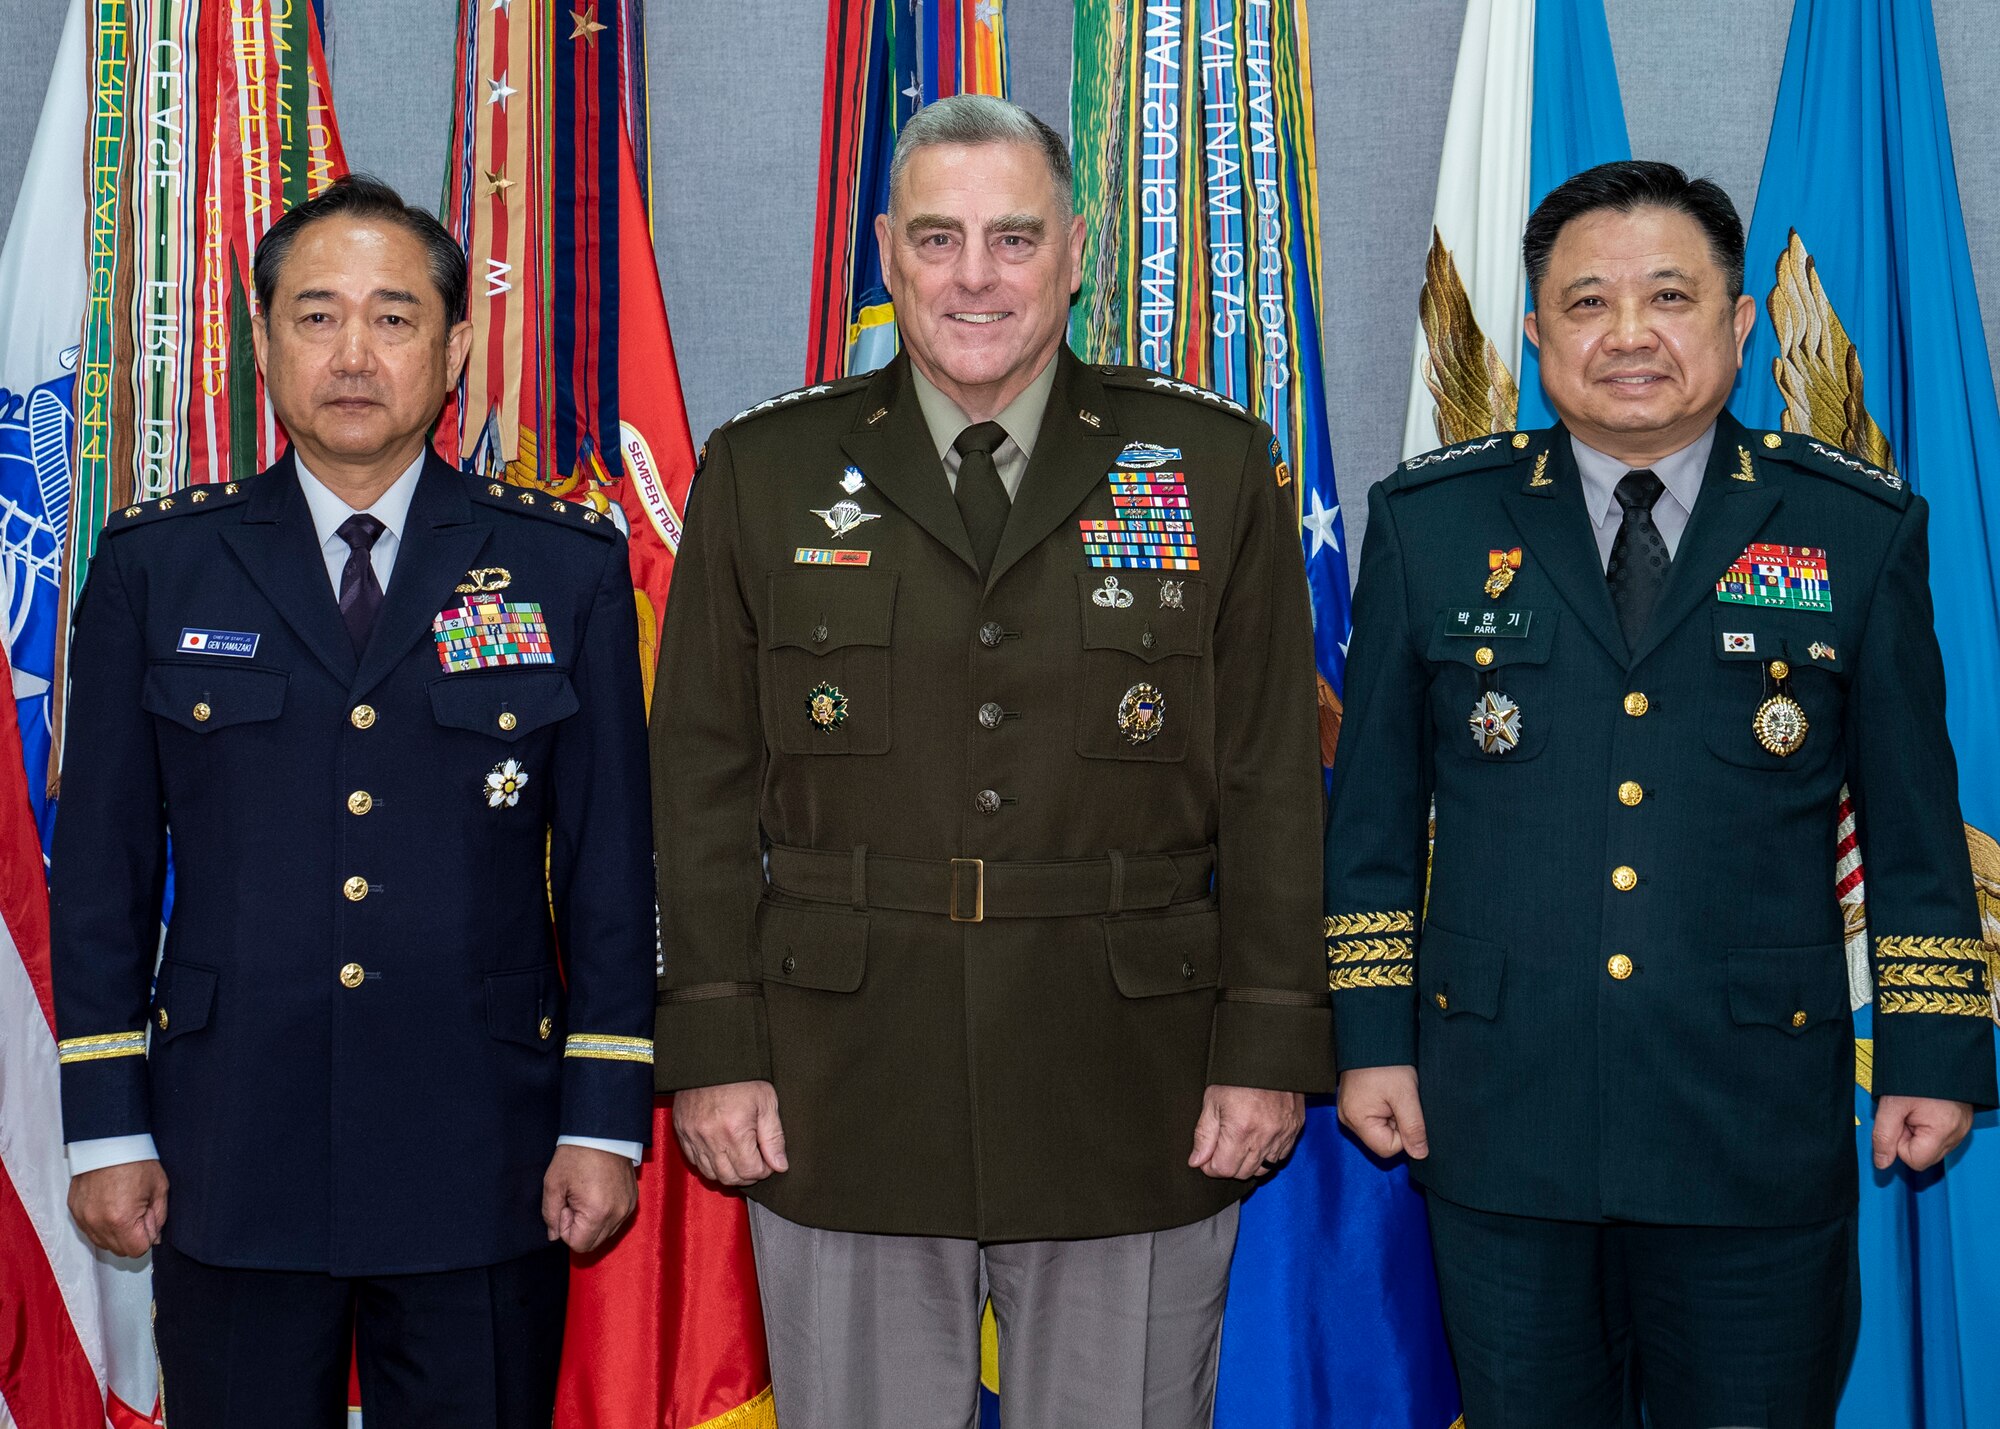 Chairman of the Joint Chiefs of Staff Army Gen. Mark A. Milley hosts Chairman of the Republic of Korea Joint Chiefs of Staff Gen. Hanki Park and Japanese Chief of Staff, Joint Staff Gen. Koji Yamazaki for a multilateral meeting Oct. 1 at the Pentagon, Washington, D.C.